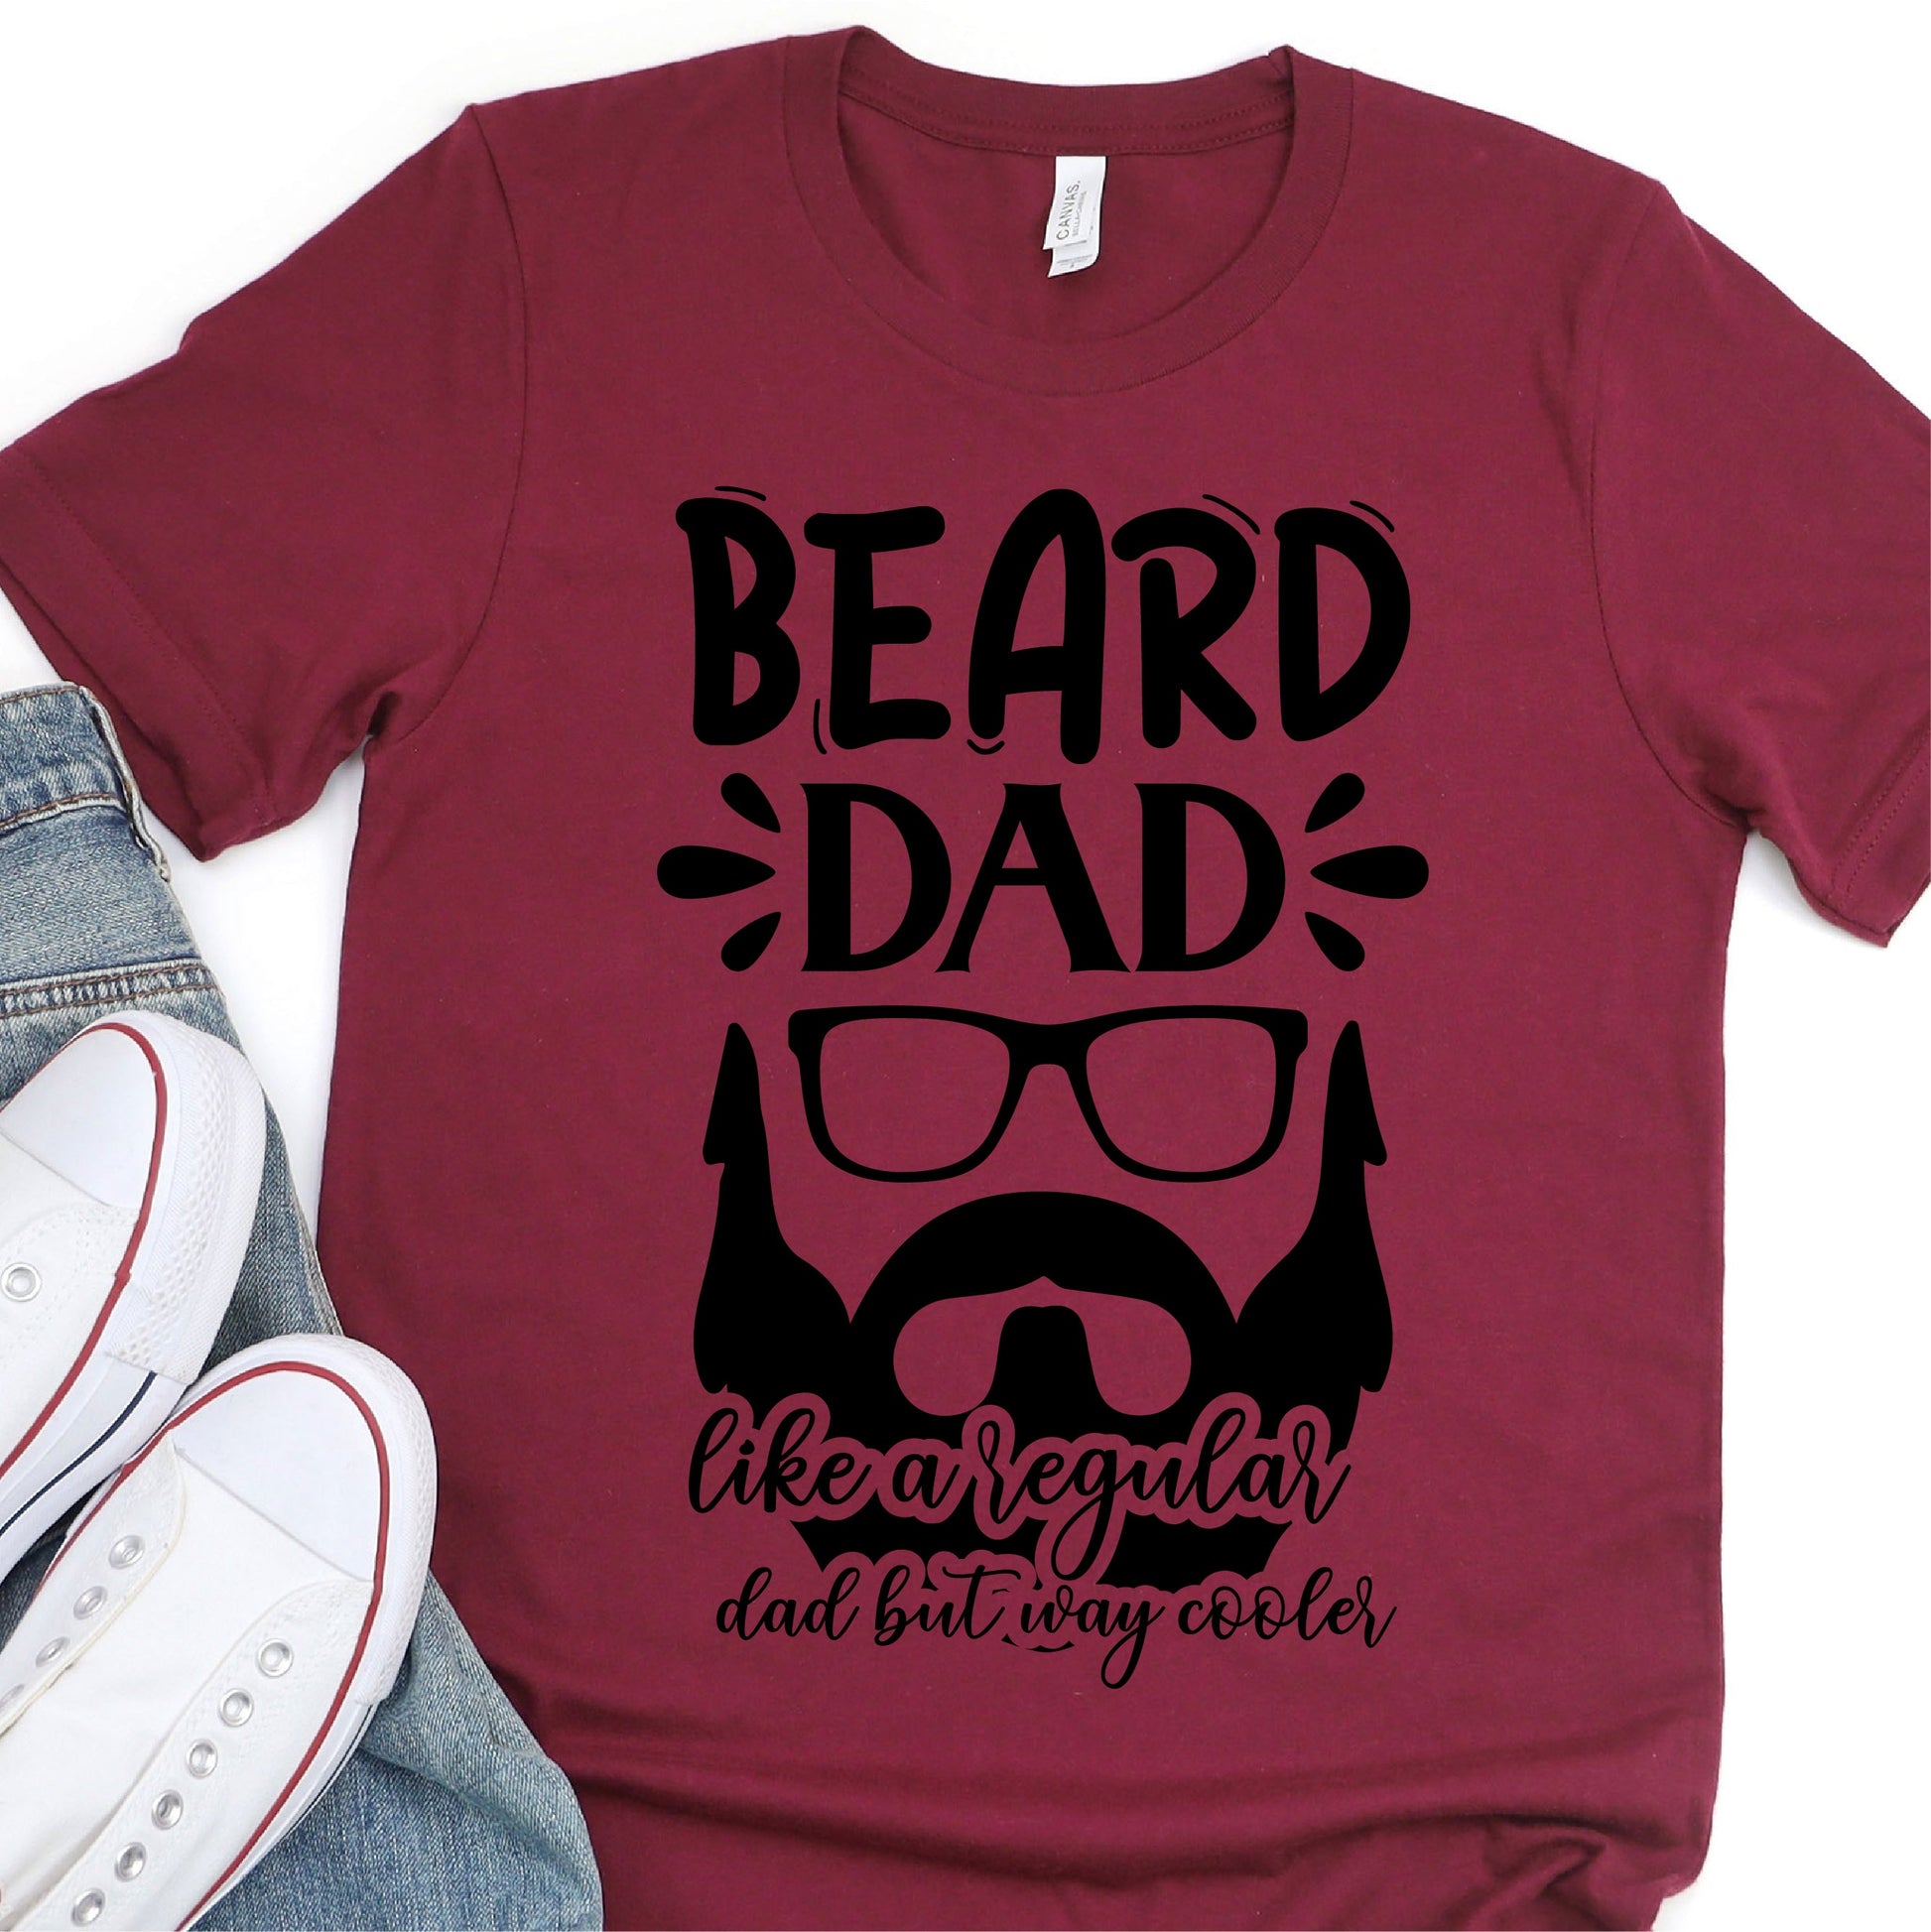 Beard Dad Like a Regular Dad But Way Cooler - Father's Day Graphic T-Shirt - T-shirt T-Shirt For Dad Nashville Design House